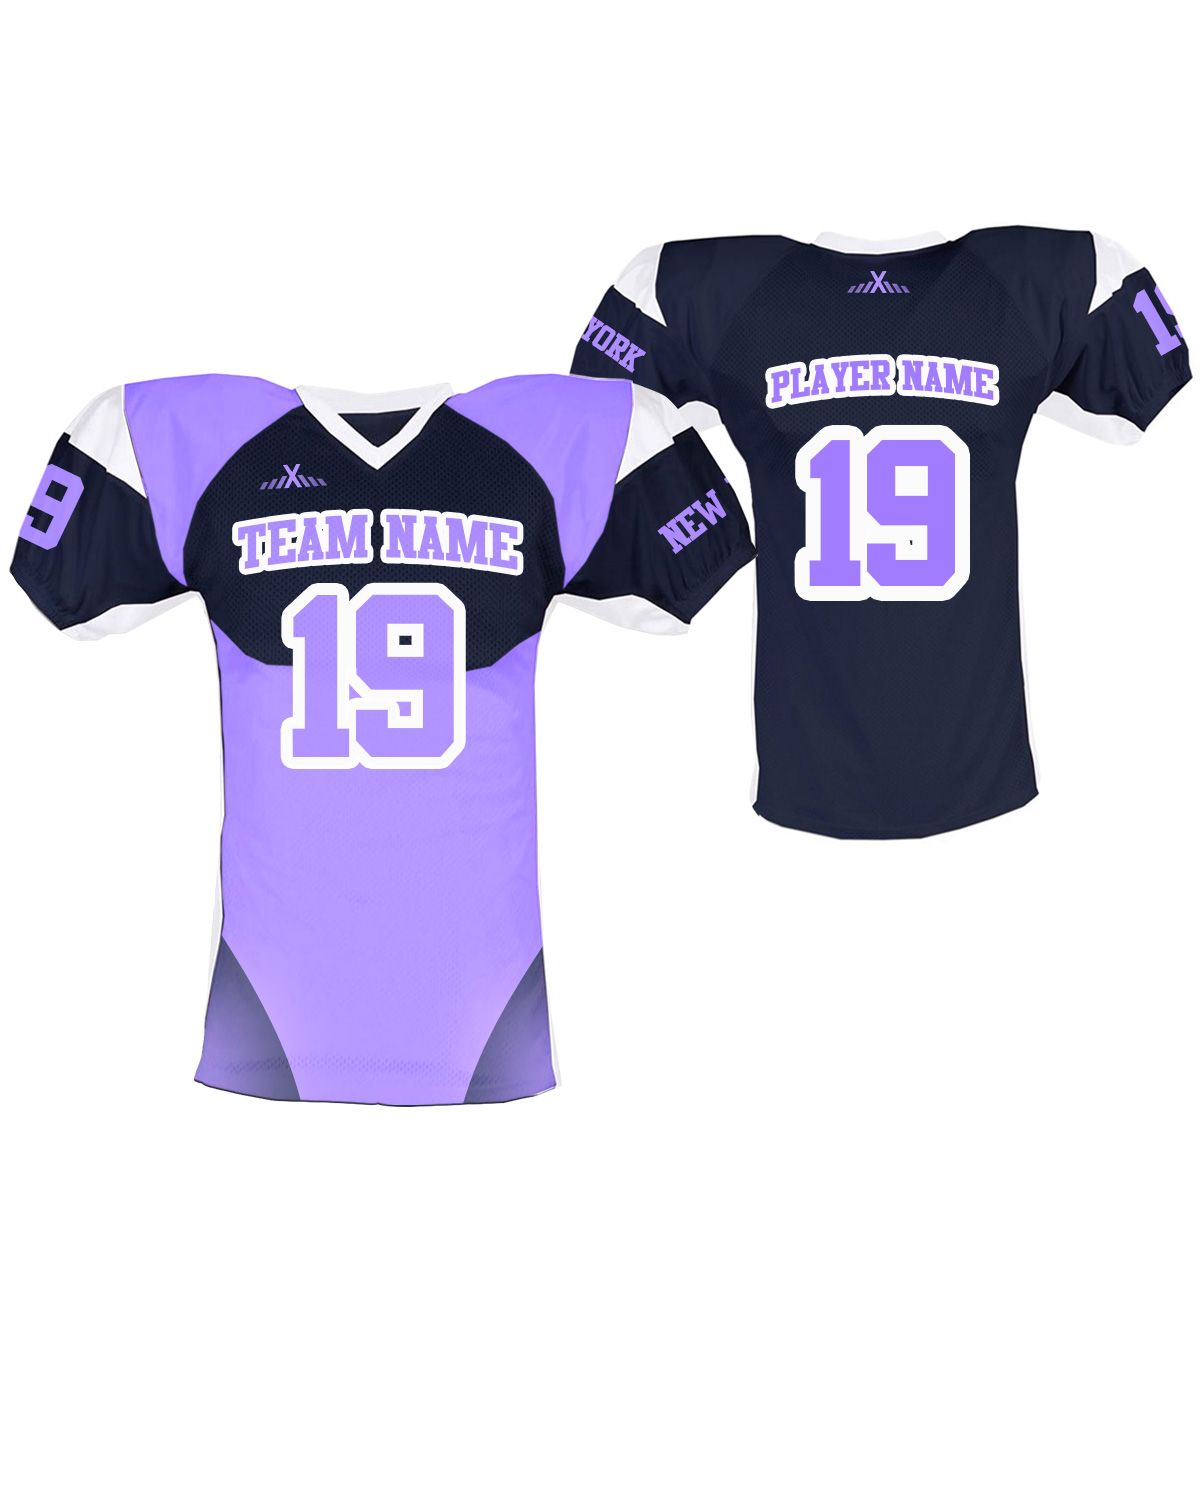 Custom Jersey for Women Football Jerseys Personalized Practice Jersey for Girl Youth with Team Name Number Sport Gift for her 